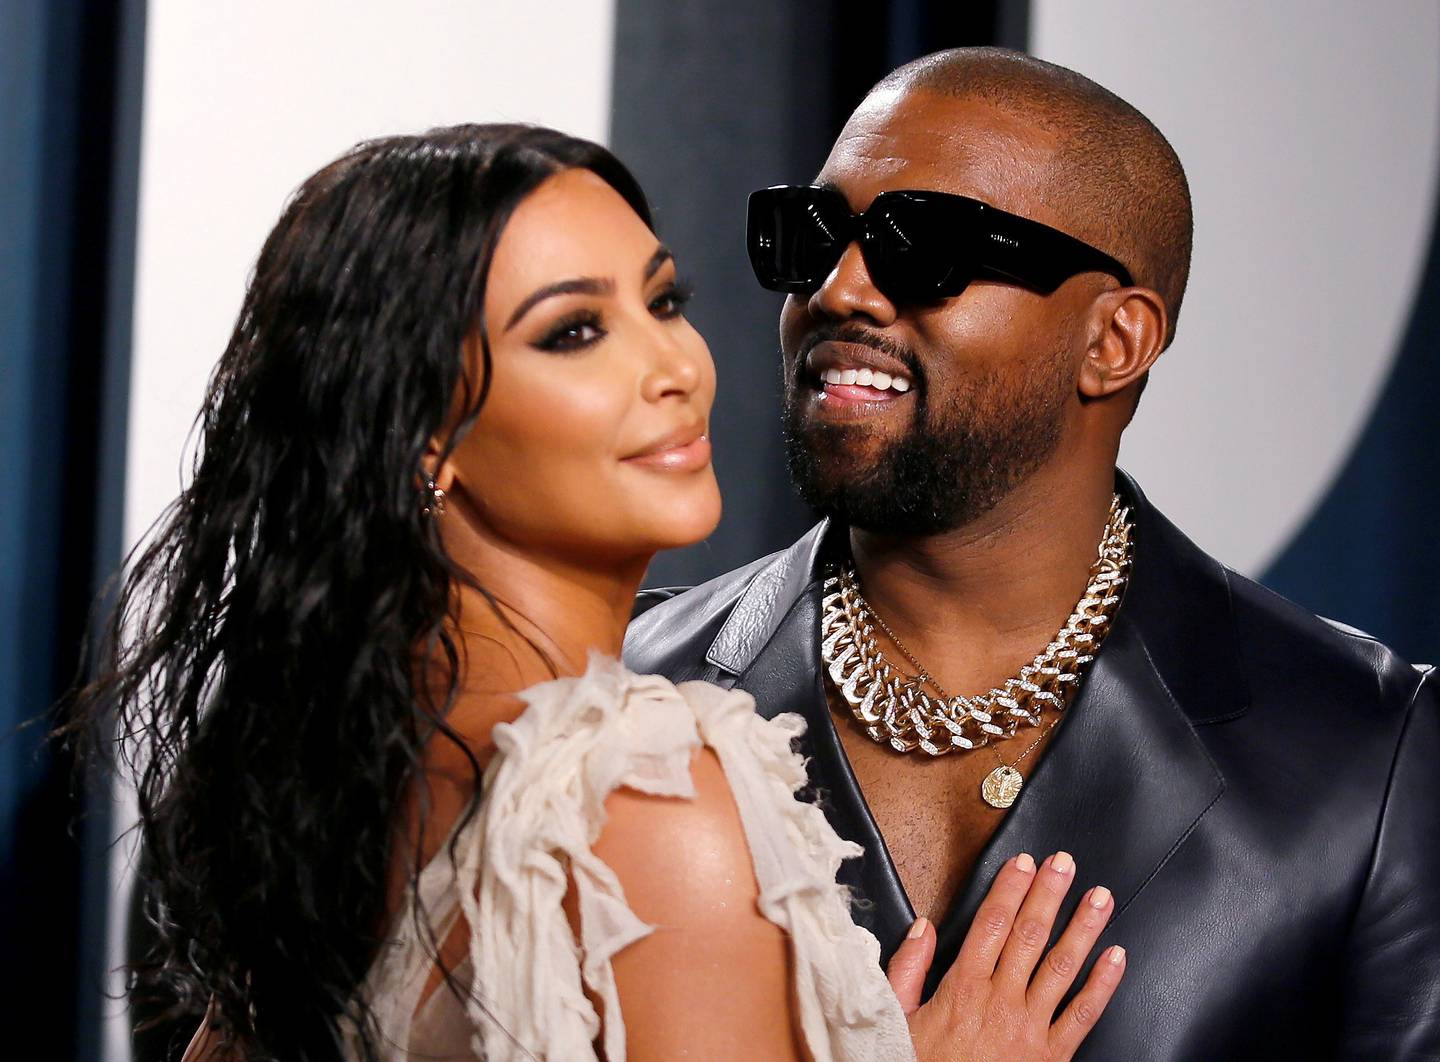 Kim Kardashian and Kanye West married in 2014 and divorced in February 2021. Reuters